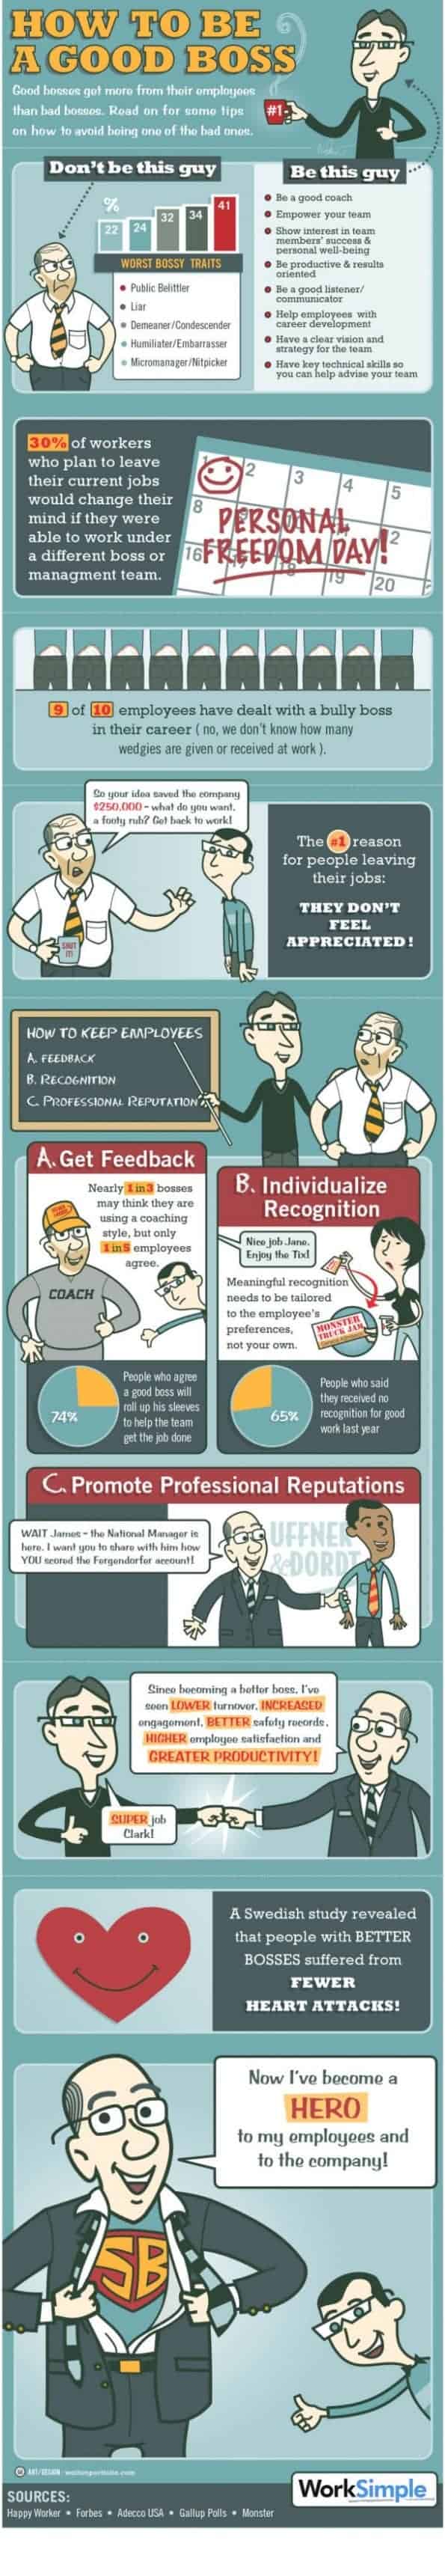 How to be a Good Boss Infographic